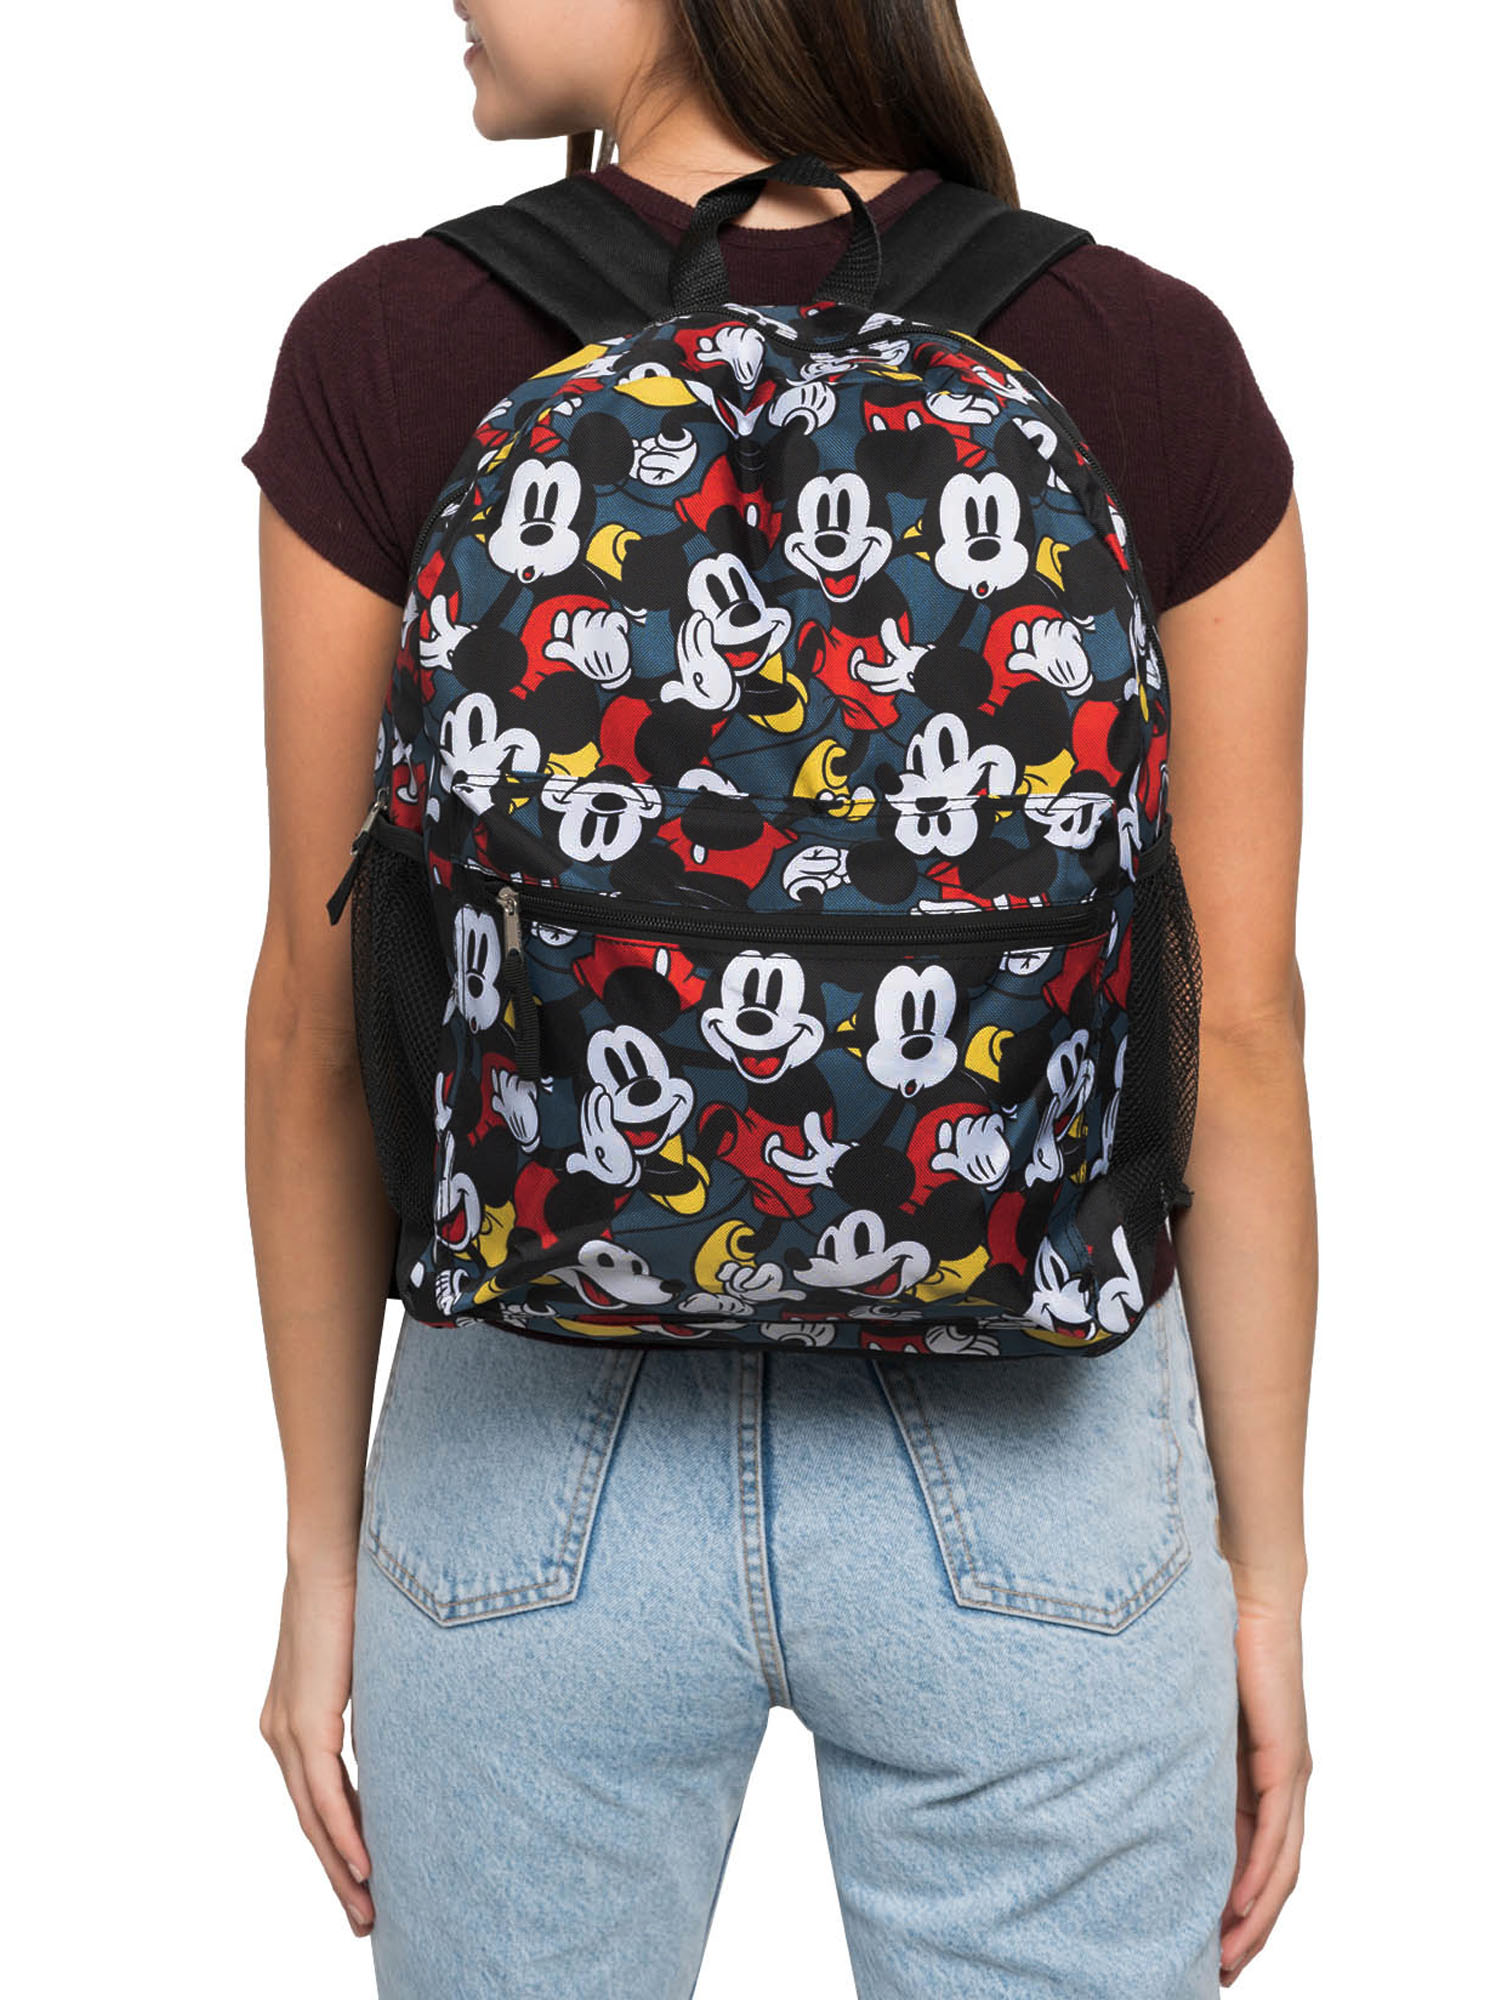 Disney Mickey Mouse Backpack 16" All-over Print Classic Front & Side Pockets - image 3 of 6